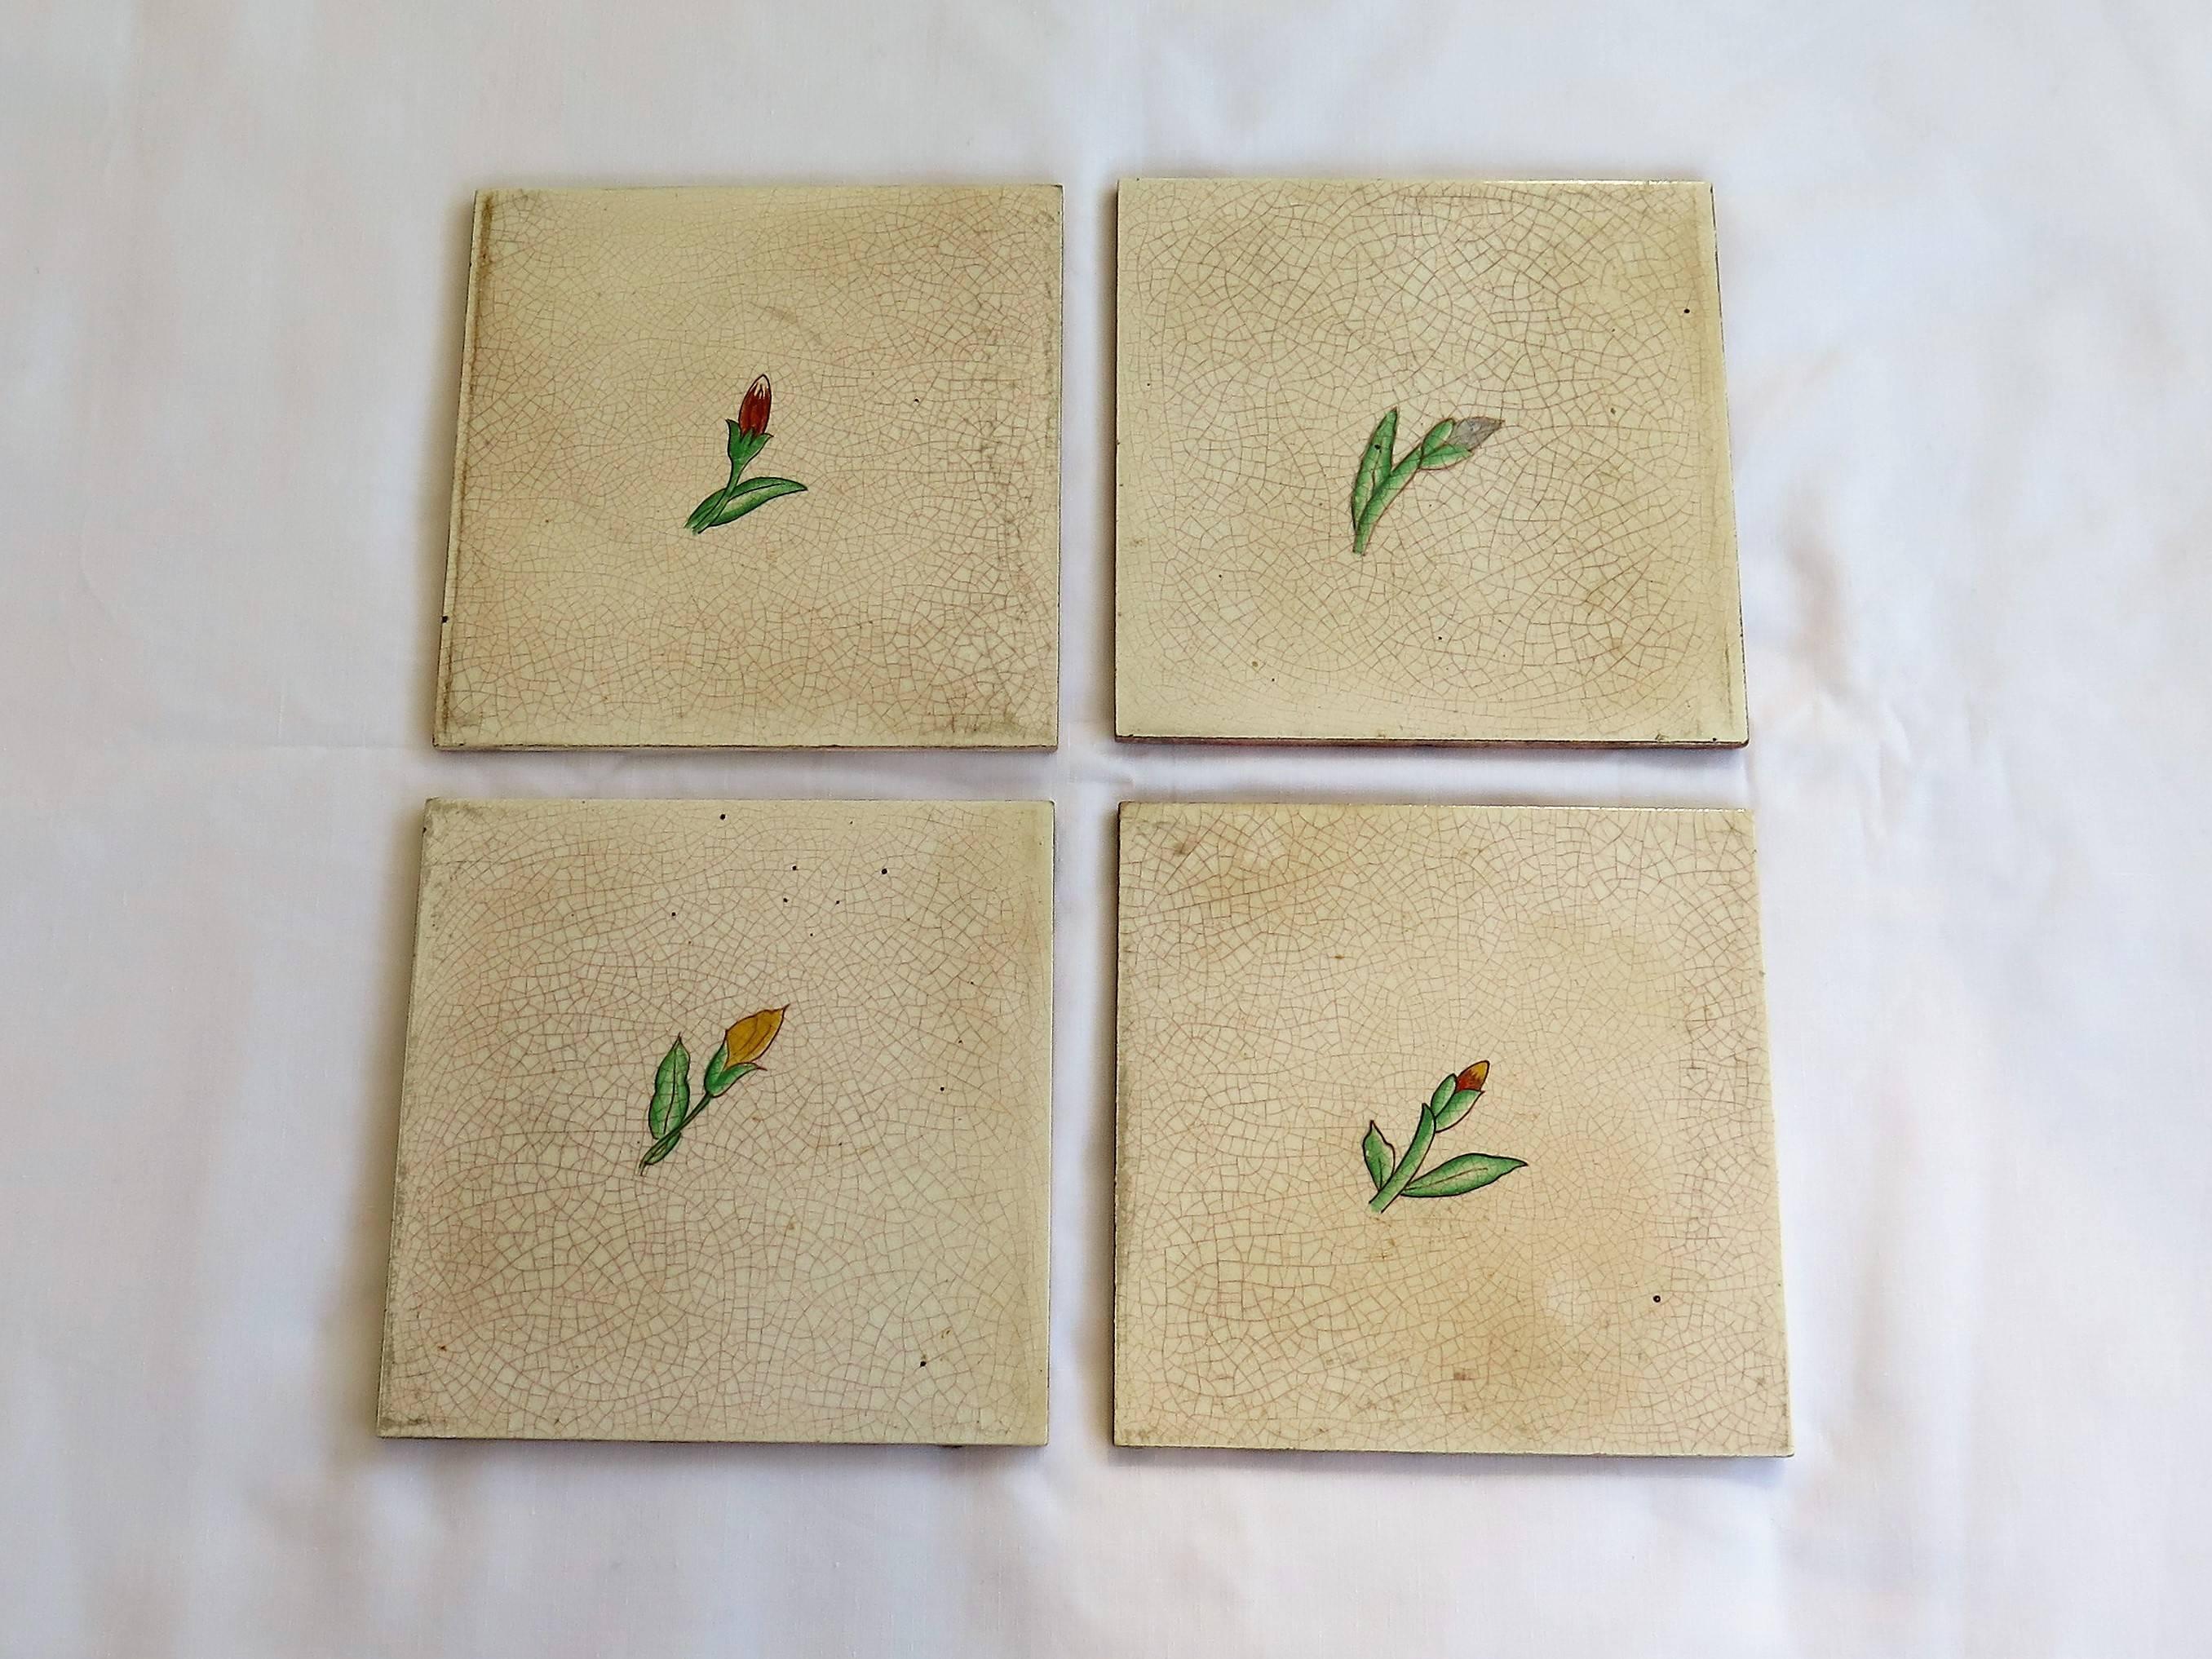 These are a very decorative set of four ceramic wall tiles, dating to the Art Deco period, Circa 1925 and made by Actiengesellschaft Wessel-Werk A.G. , Germany who used the BONNA mark between 1920 and 1930.

Each tile is nominally 6 inches square by